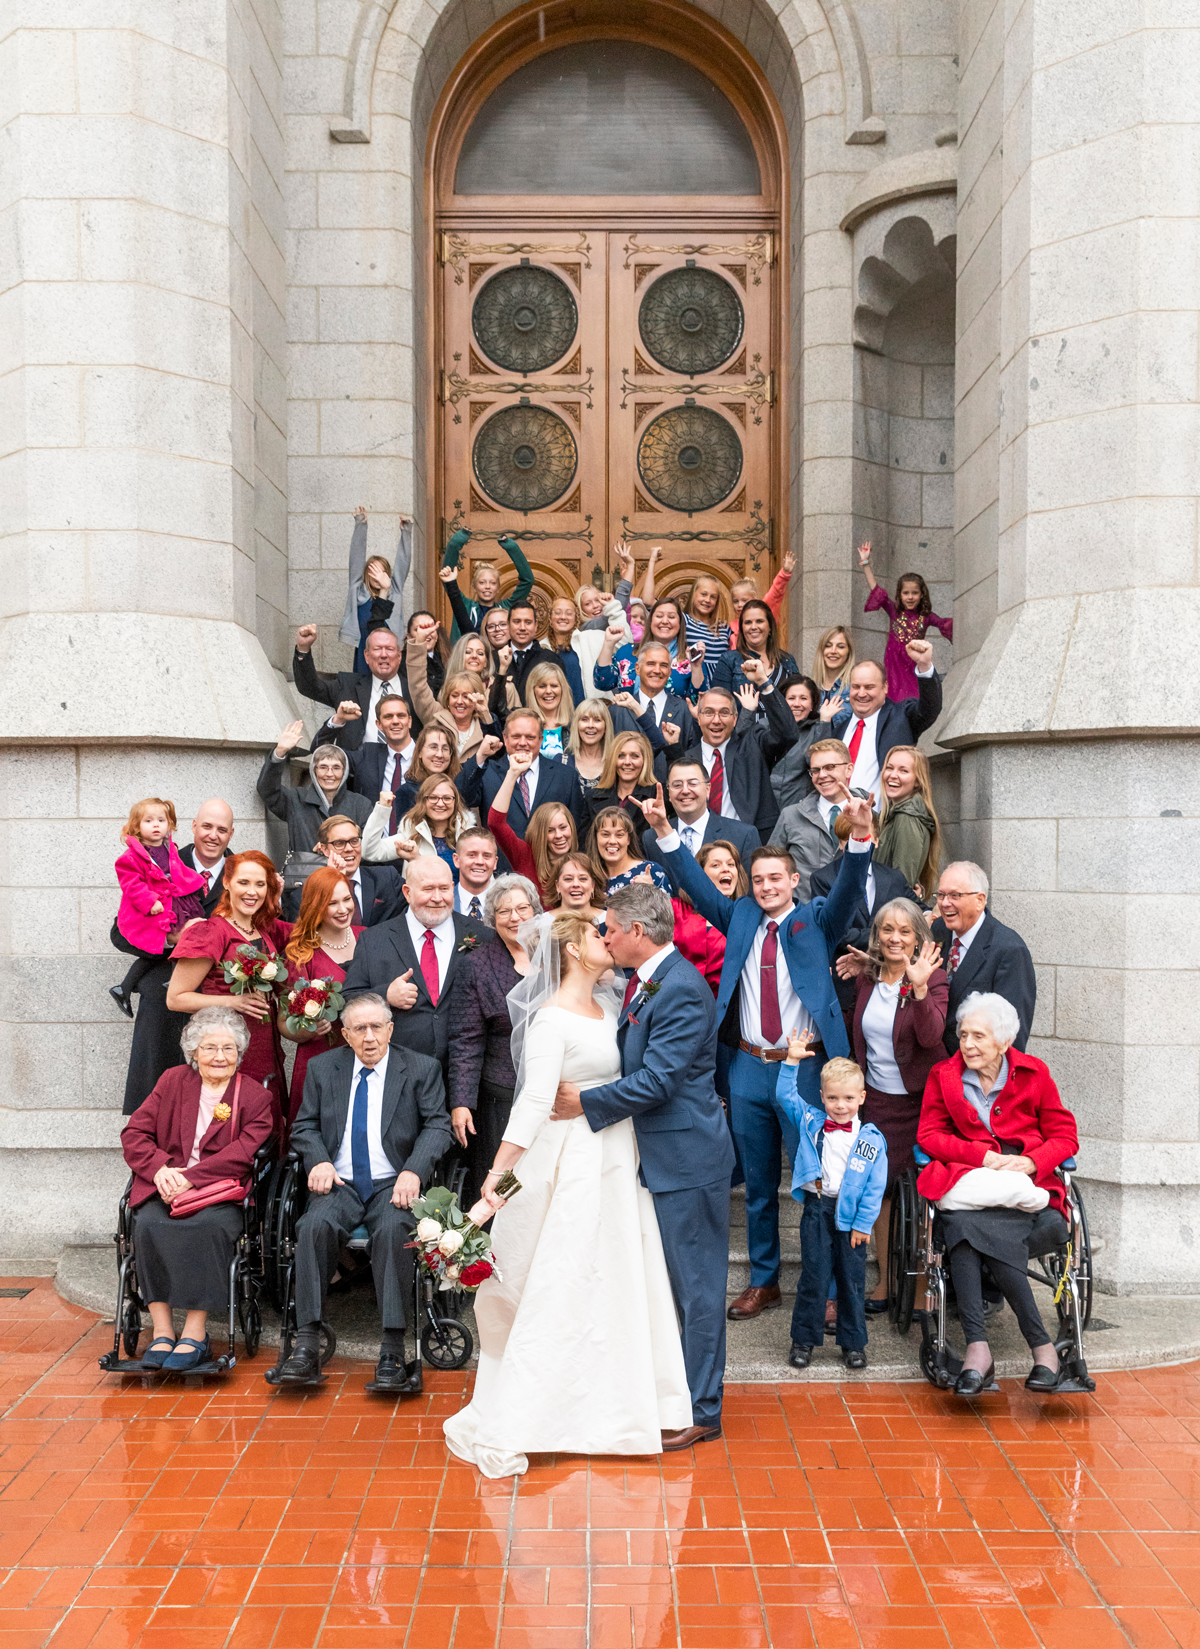  temple exit salt lake city lds temple temple square large group photo celebrating hands in the air bride and groom kissing happy rainy wedding day cranberry red and navy wedding colors professional salt lake city wedding photographer #saltlakeldstem